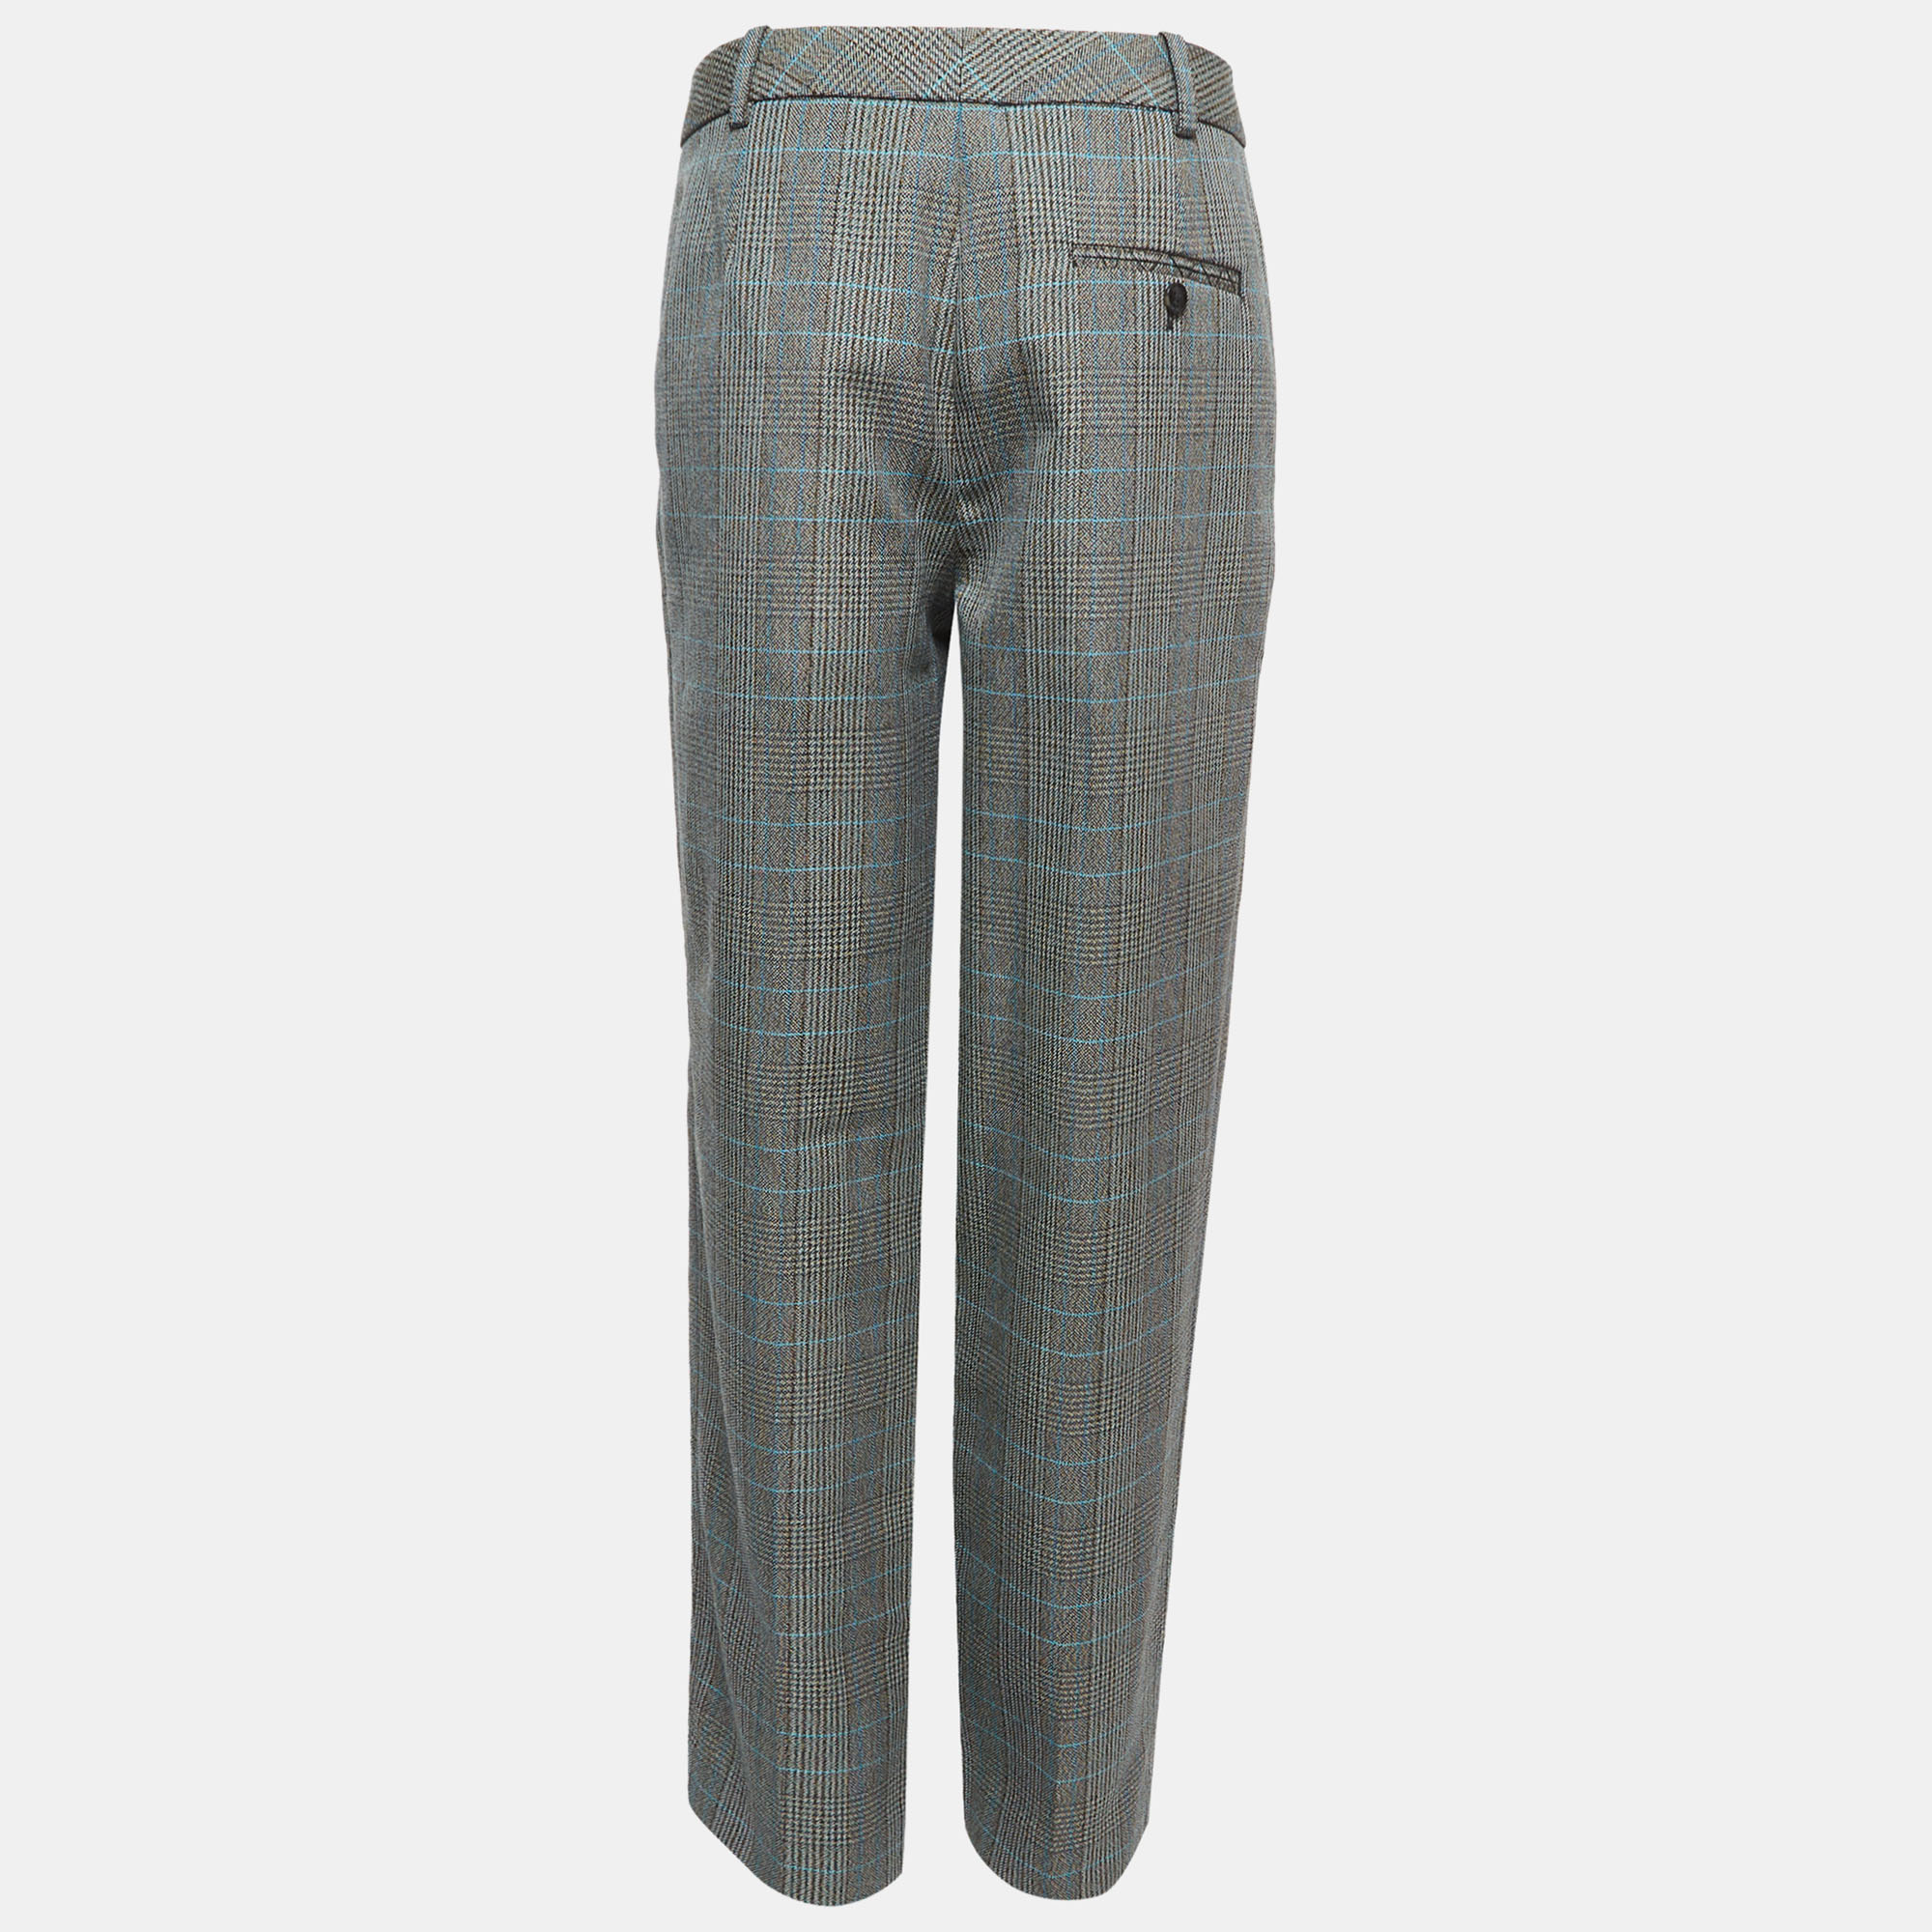 3.1 Phillip Lim Black/Multicolor Checked Wool Blend Trousers S